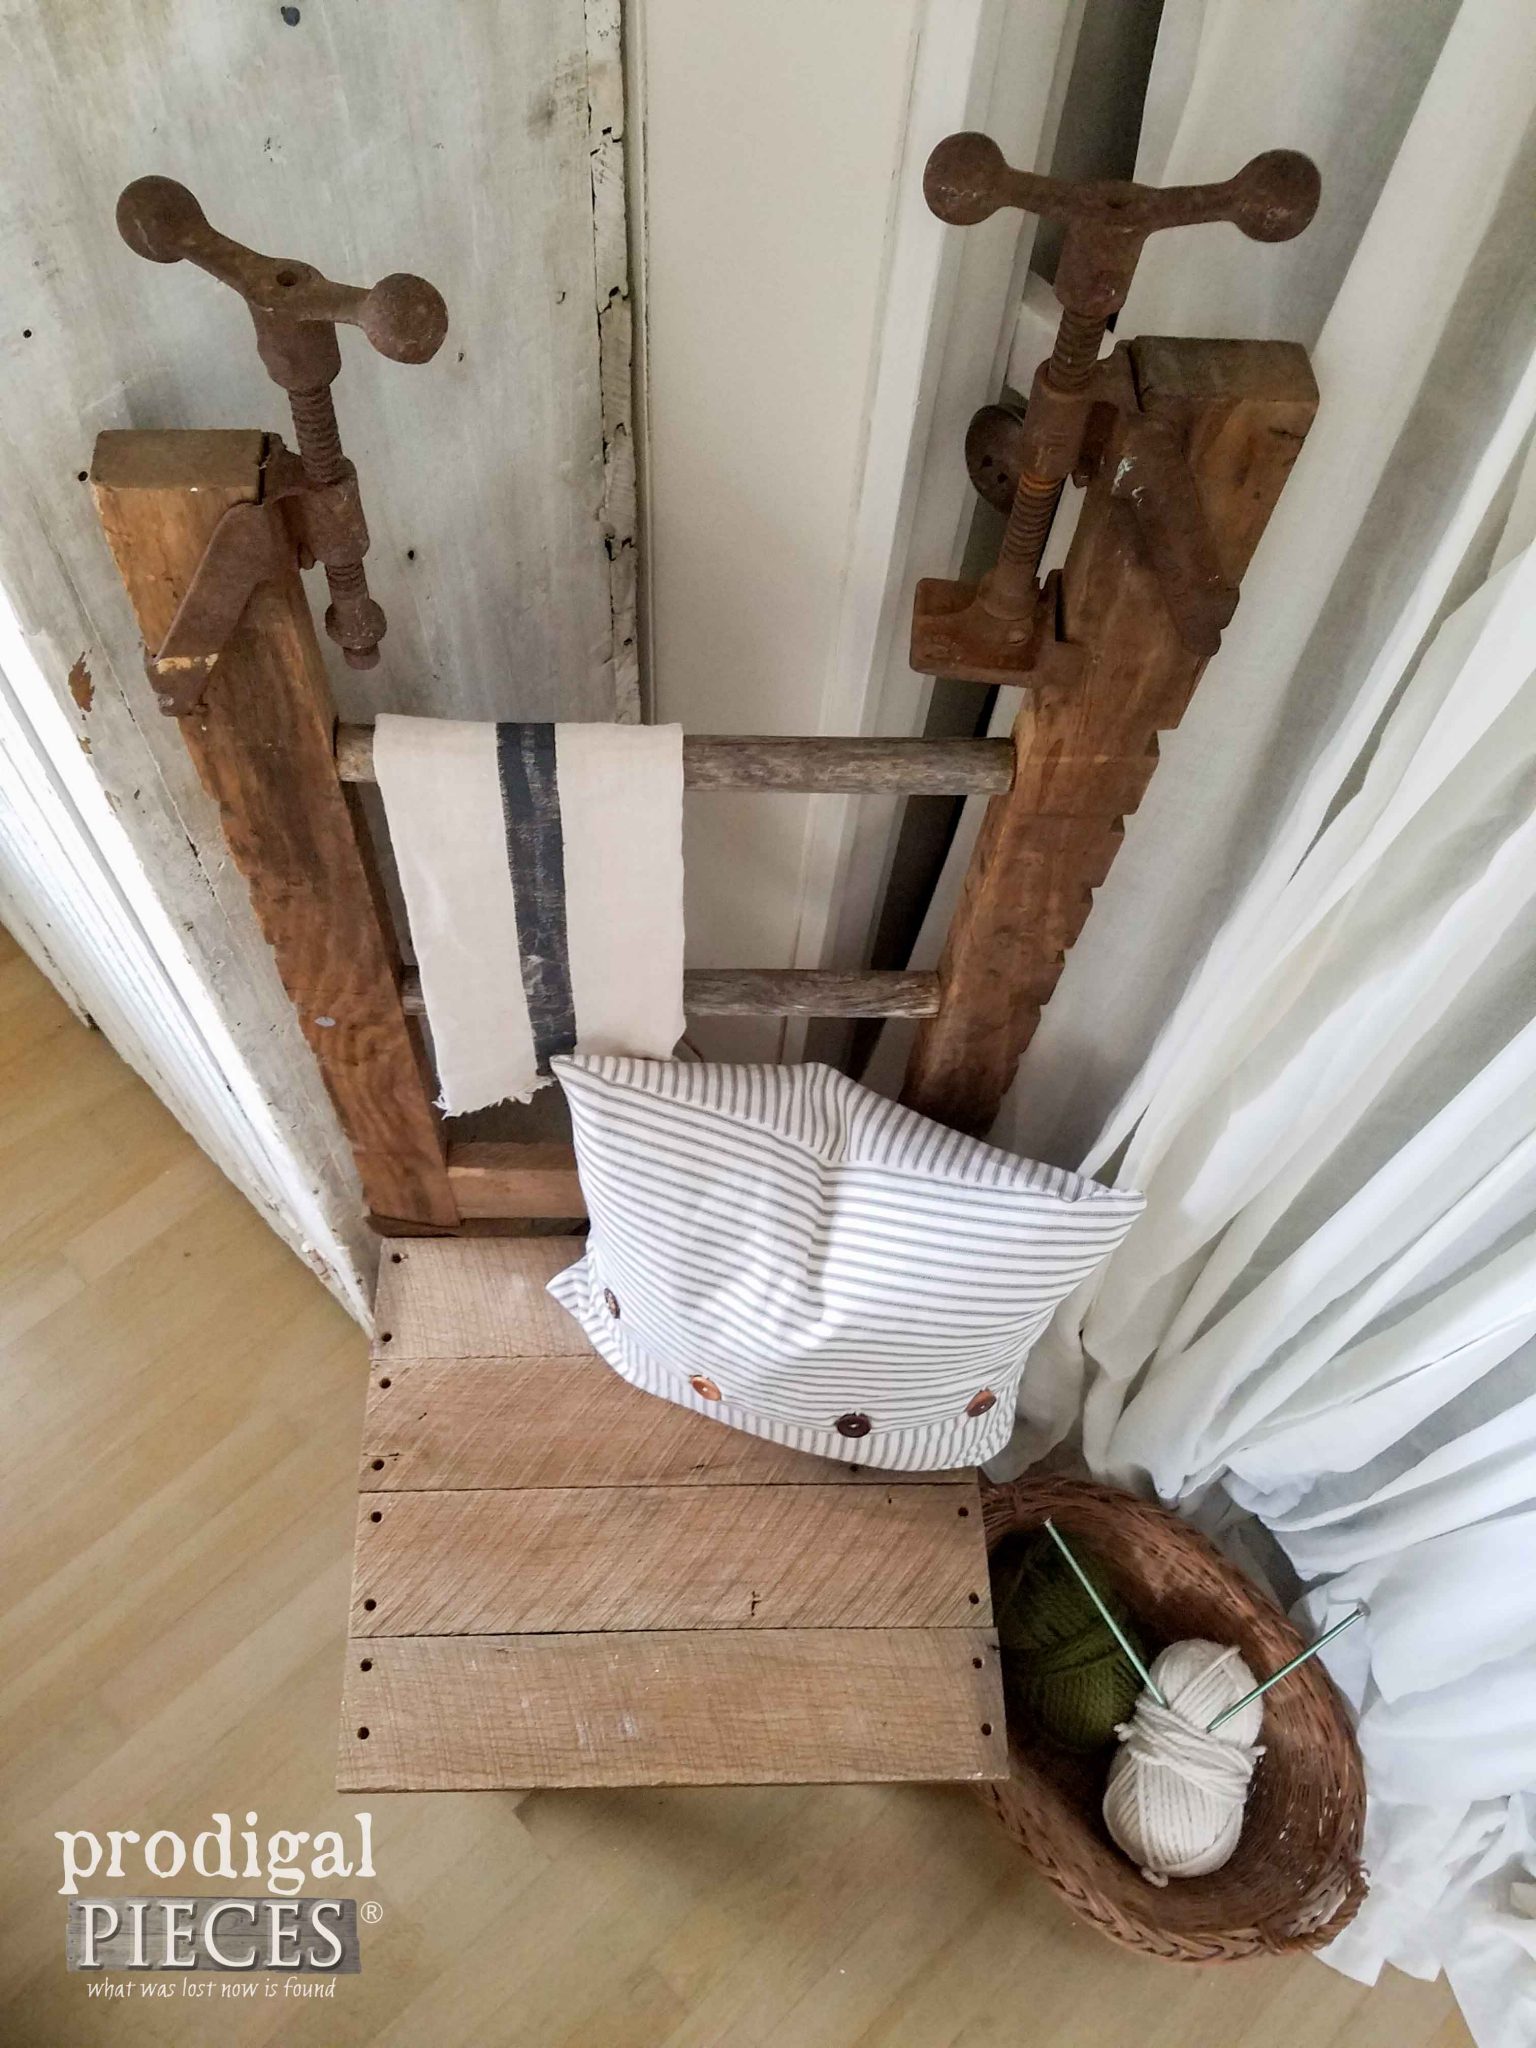 Top View of Repurposed Antique Clamp, Ladder, and Barn Wood Chair by Prodigal Pieces | prodigalpieces.com